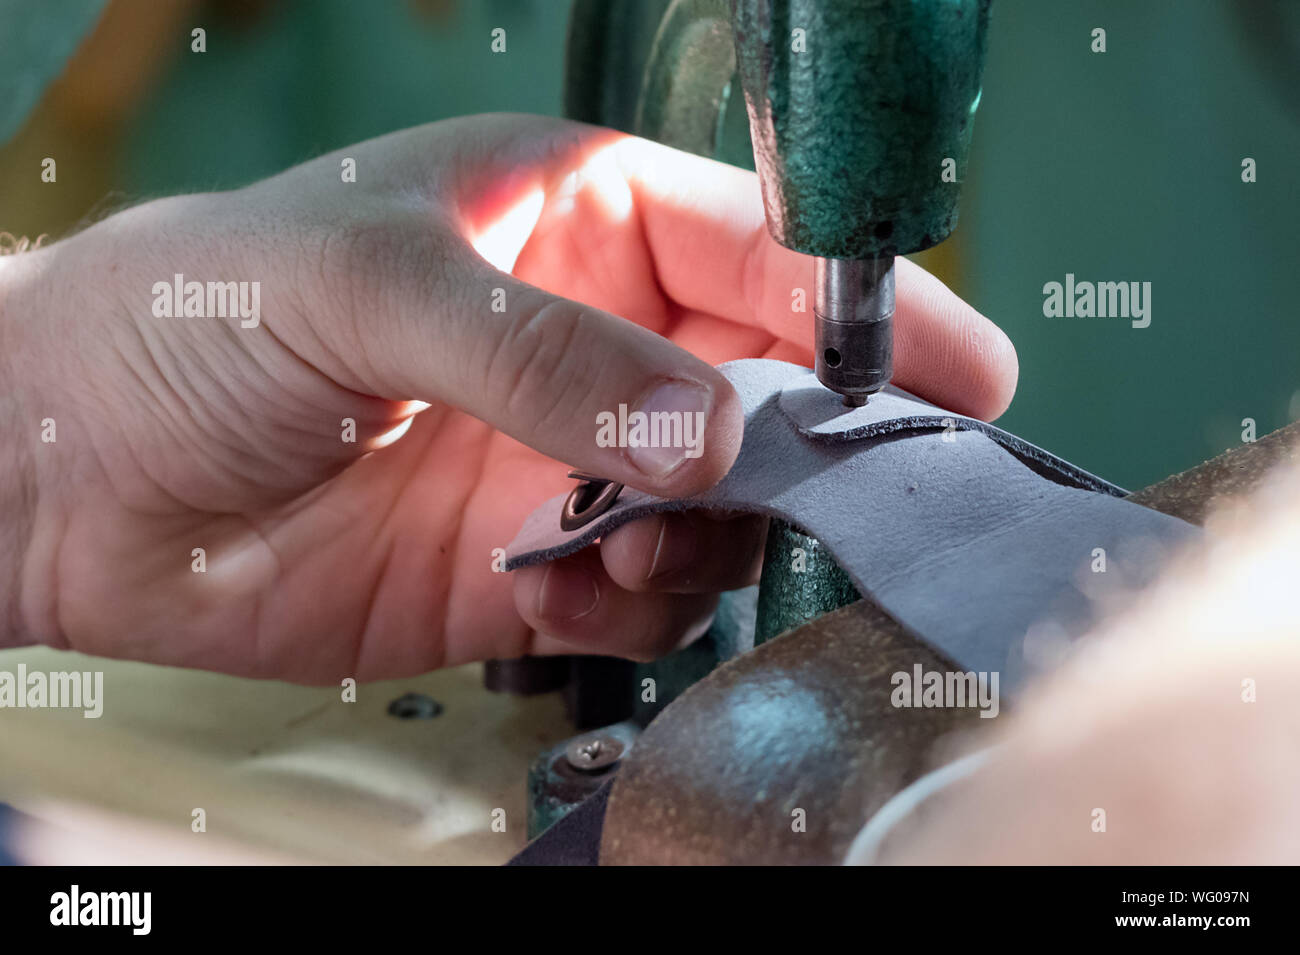 Close up of the hands of a male shoemaker riveting with an old rivet press machine. Stock Photo